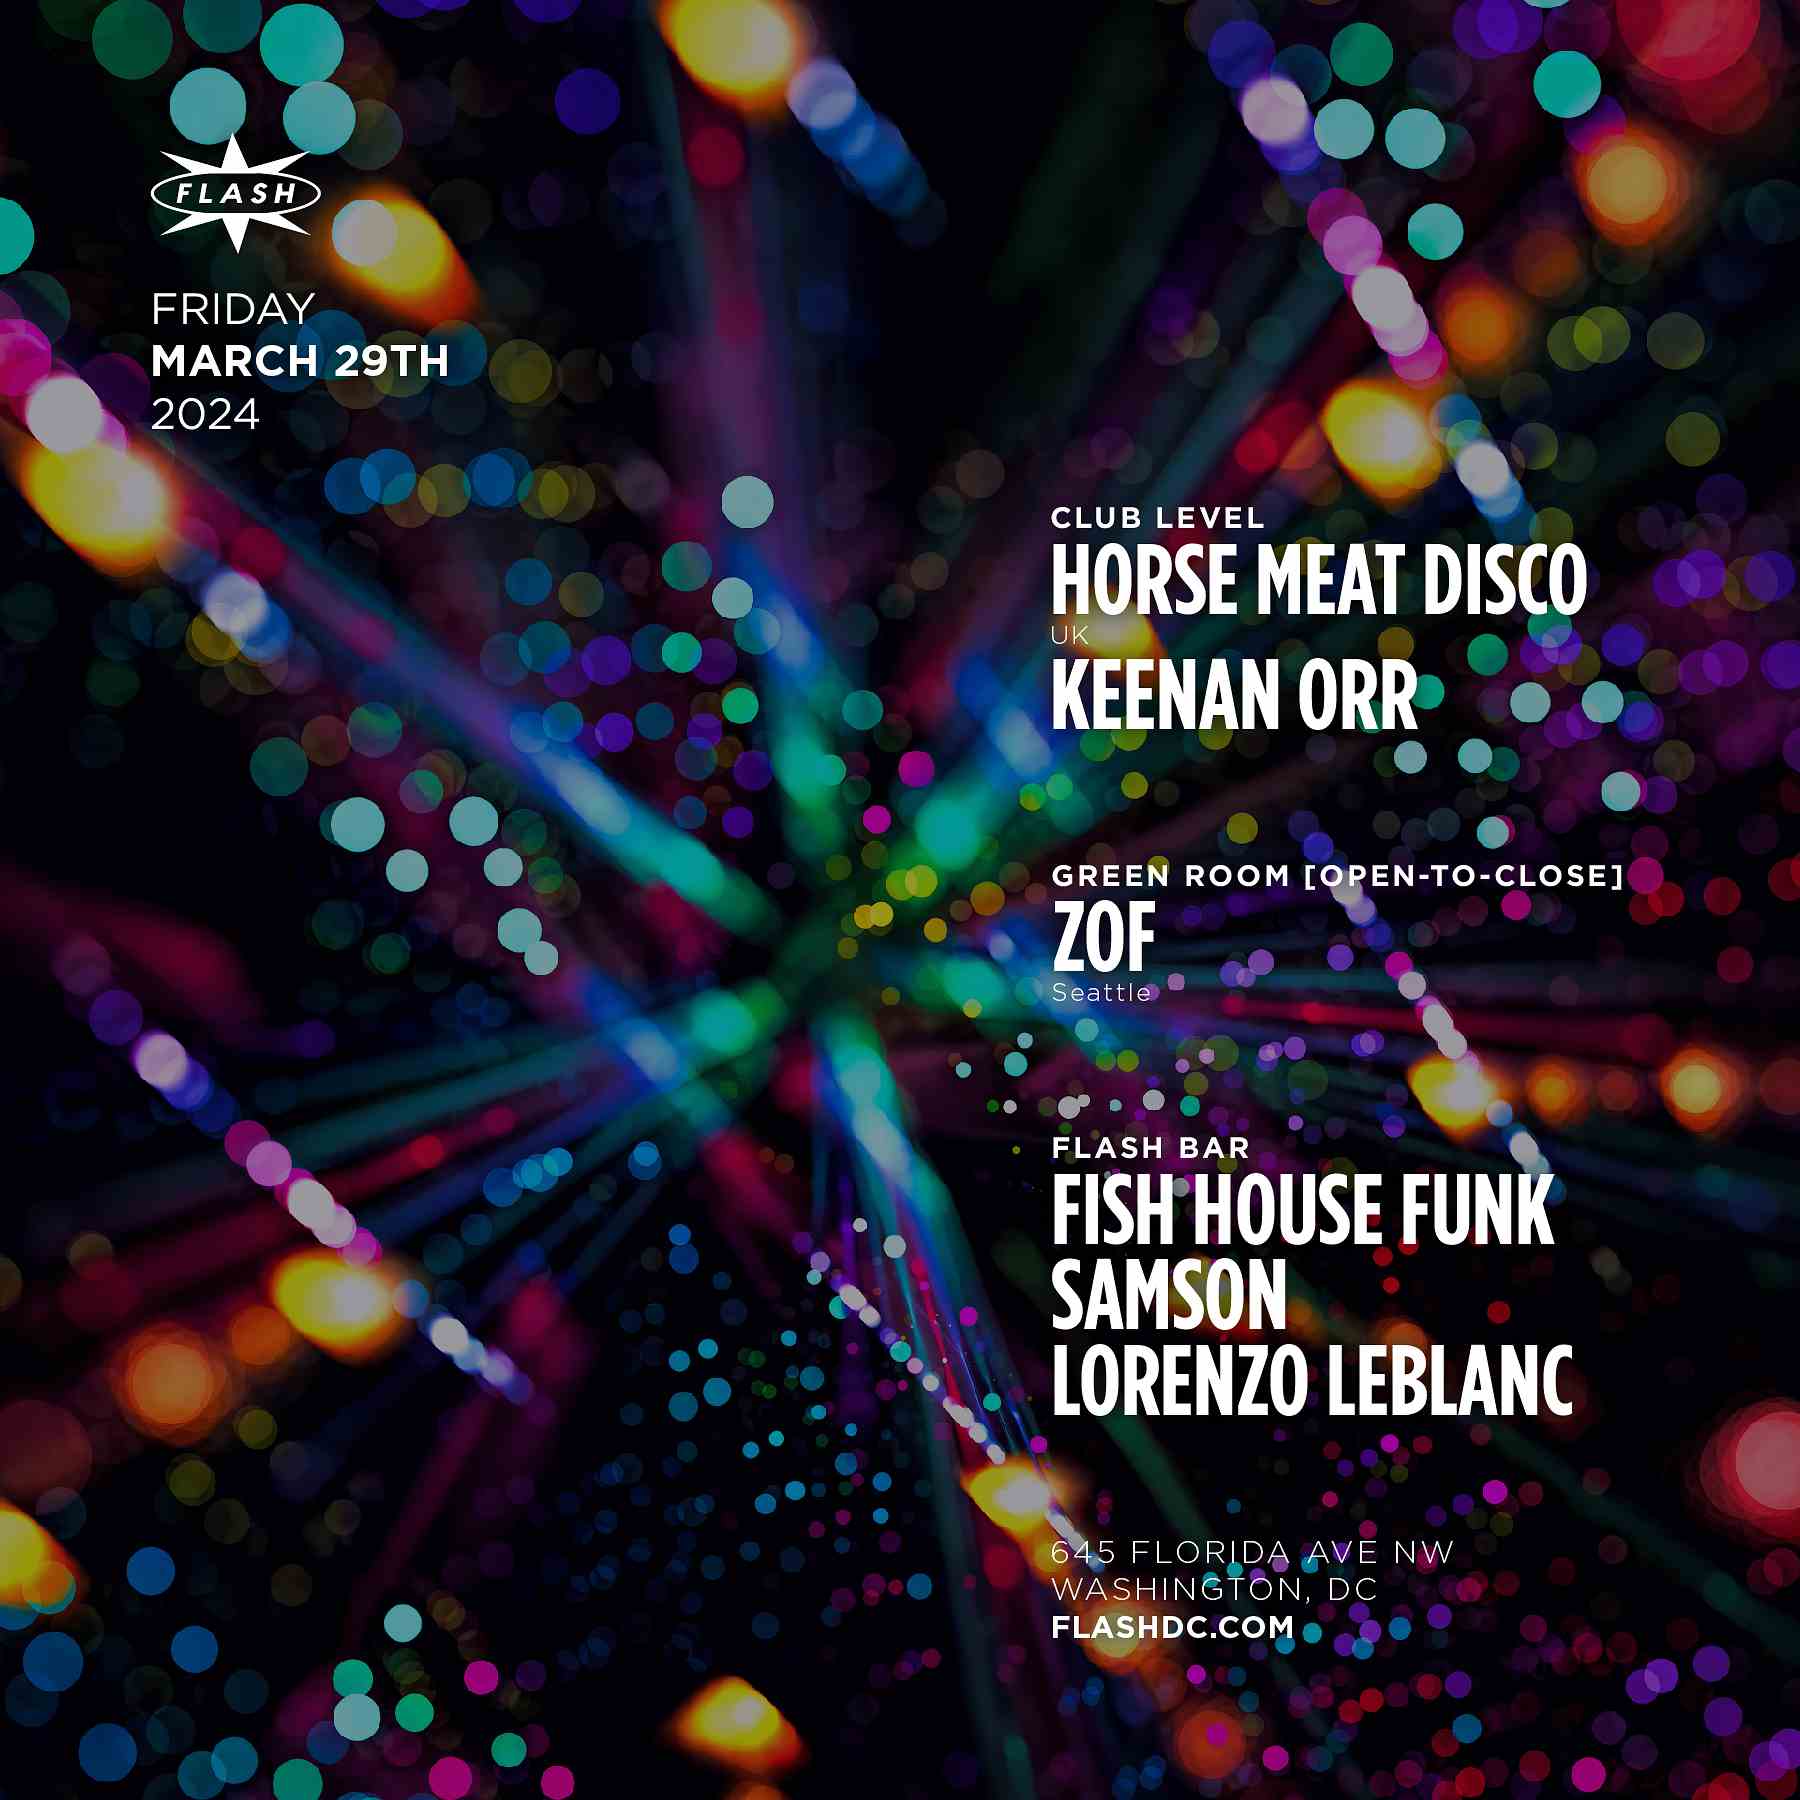 Horse Meat Disco event flyer